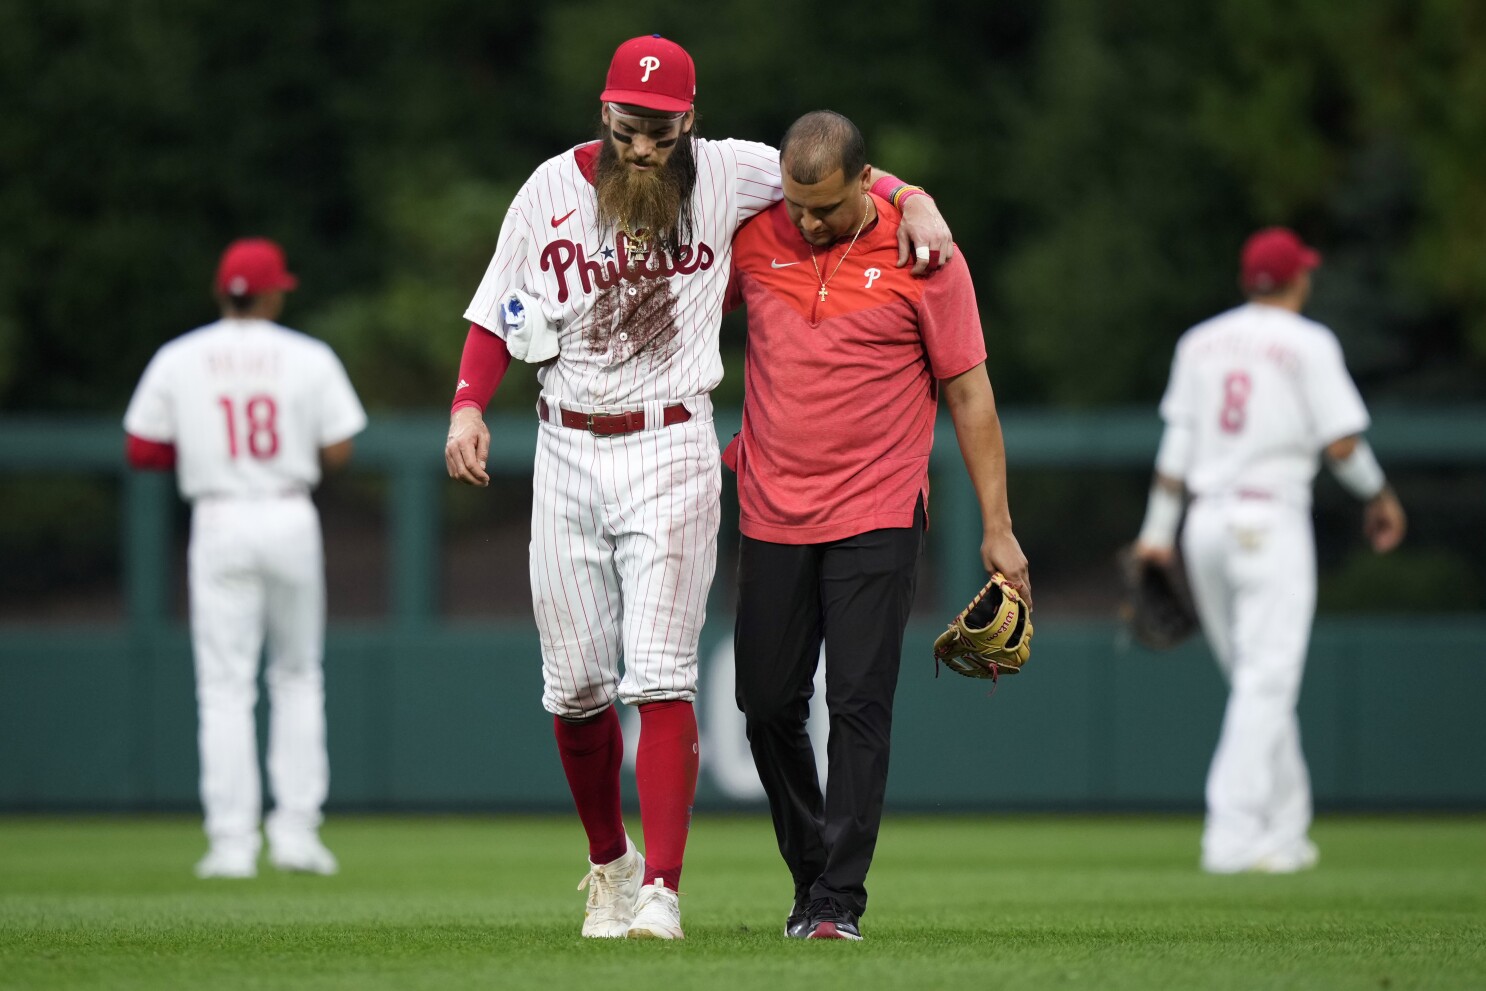 Phillies place OF Marsh on 10-day injured list with left knee